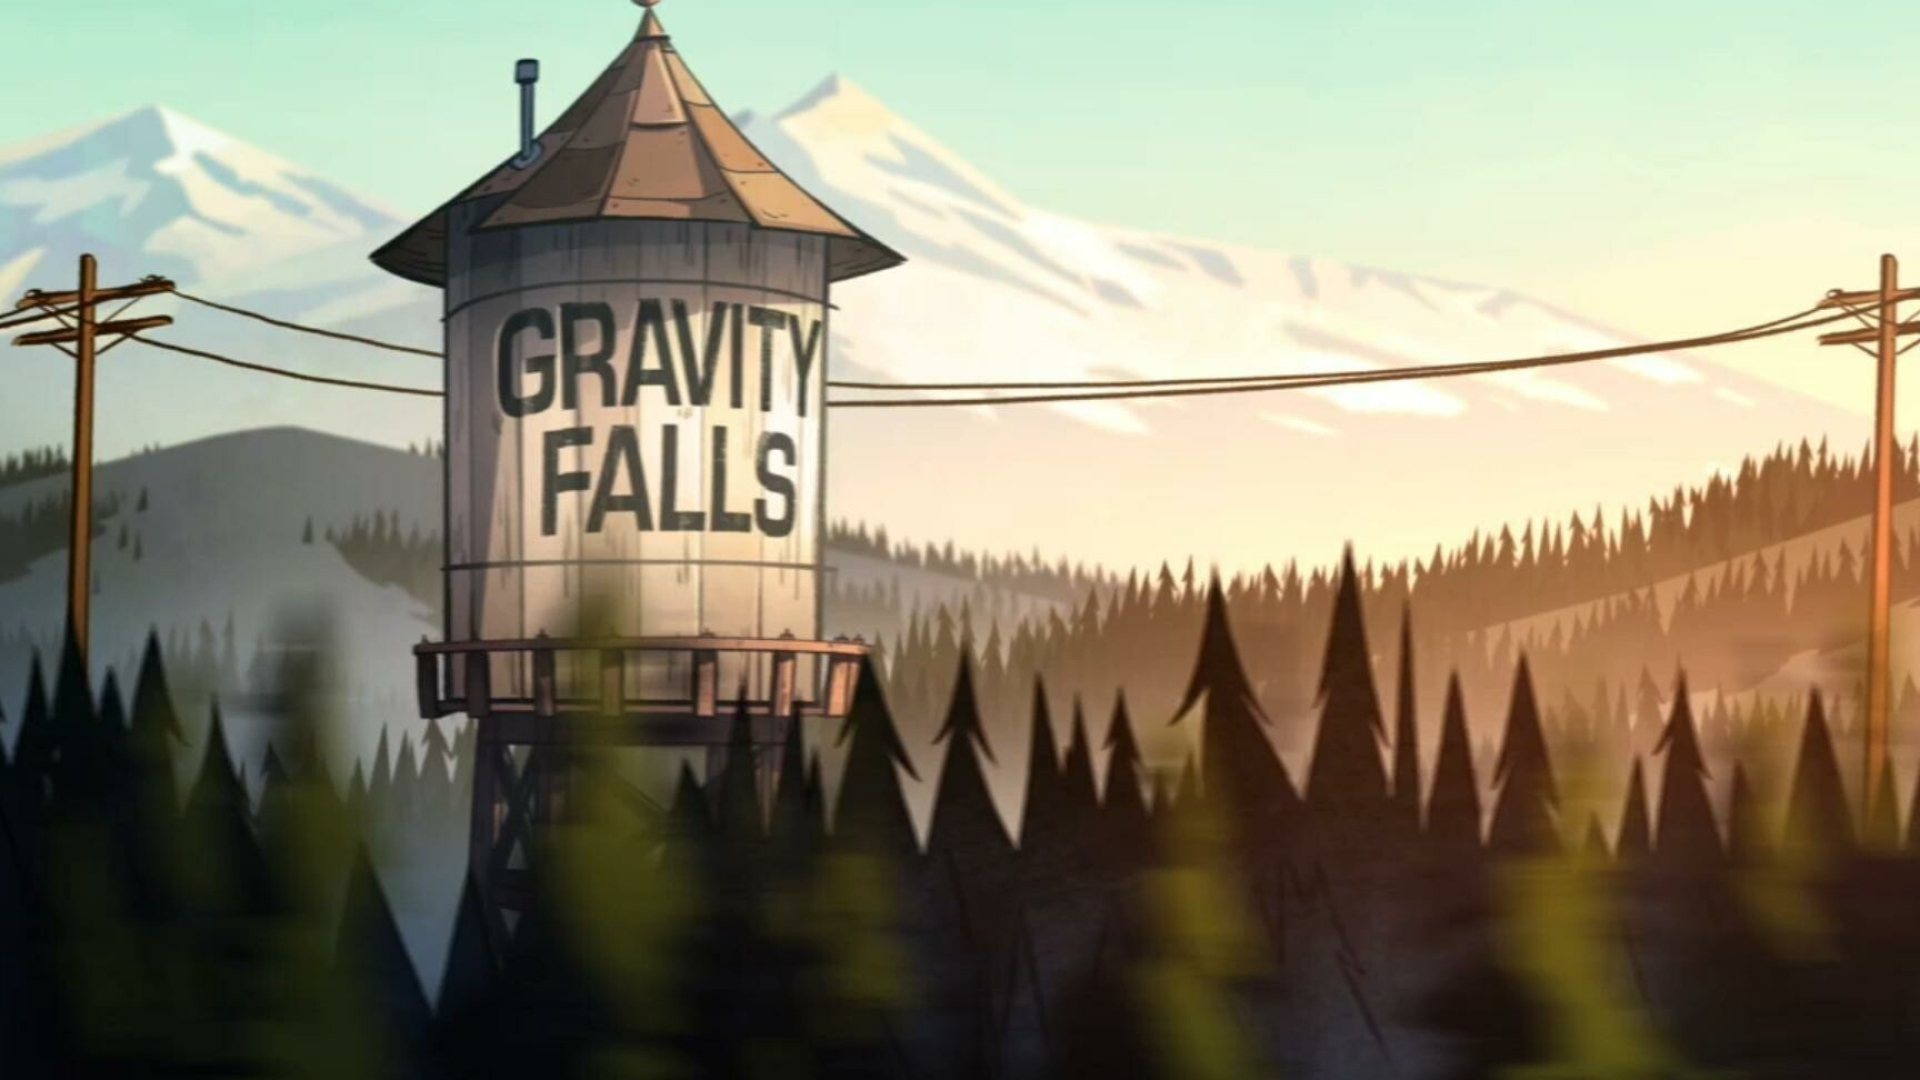 Gravity Falls: A mysterious town full of paranormal incidents and supernatural creatures. 1920x1080 Full HD Background.